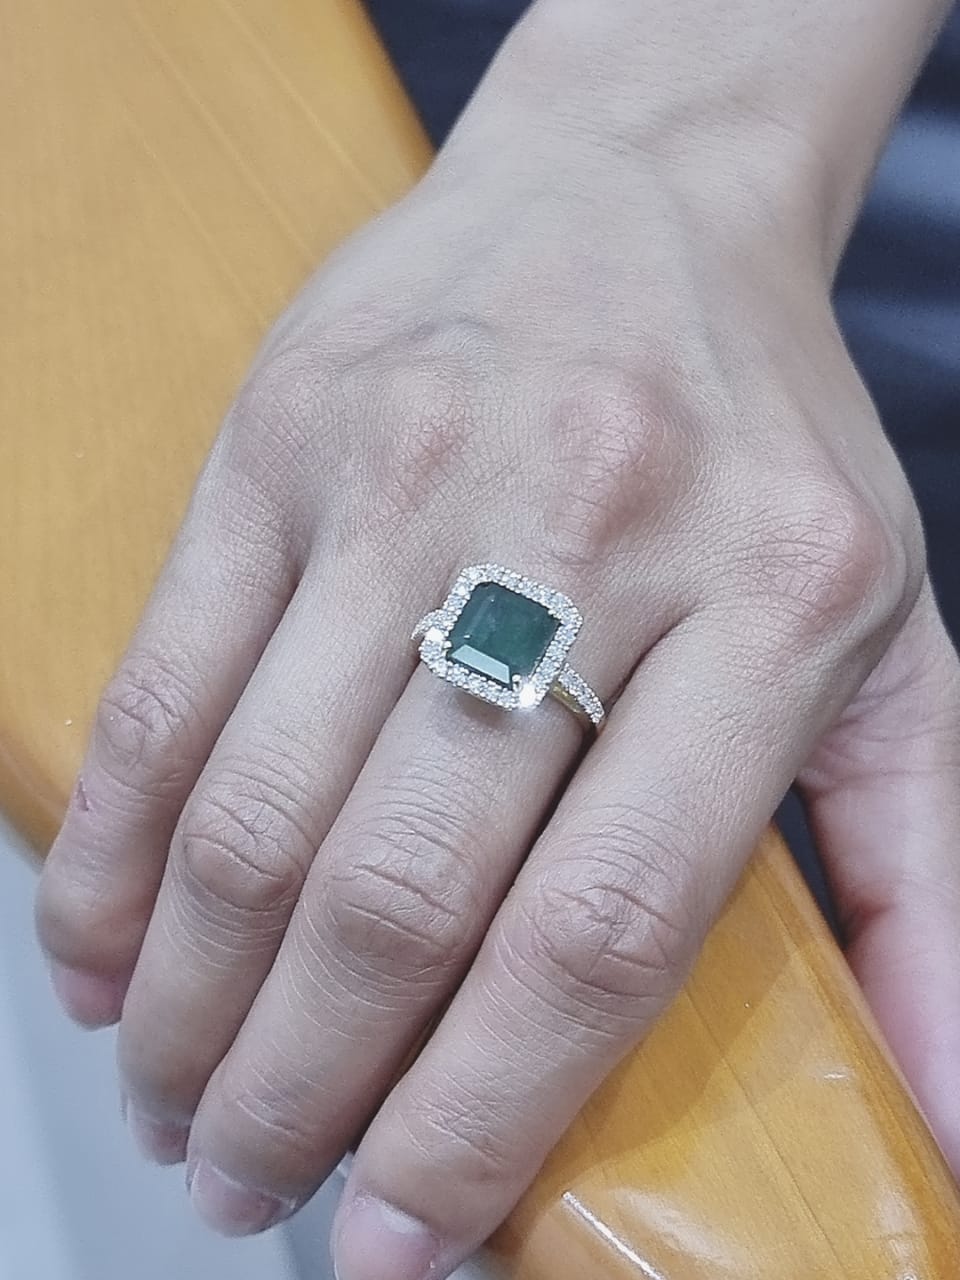 Halo Emerald And Diamond Ring In 18k Yellow Gold